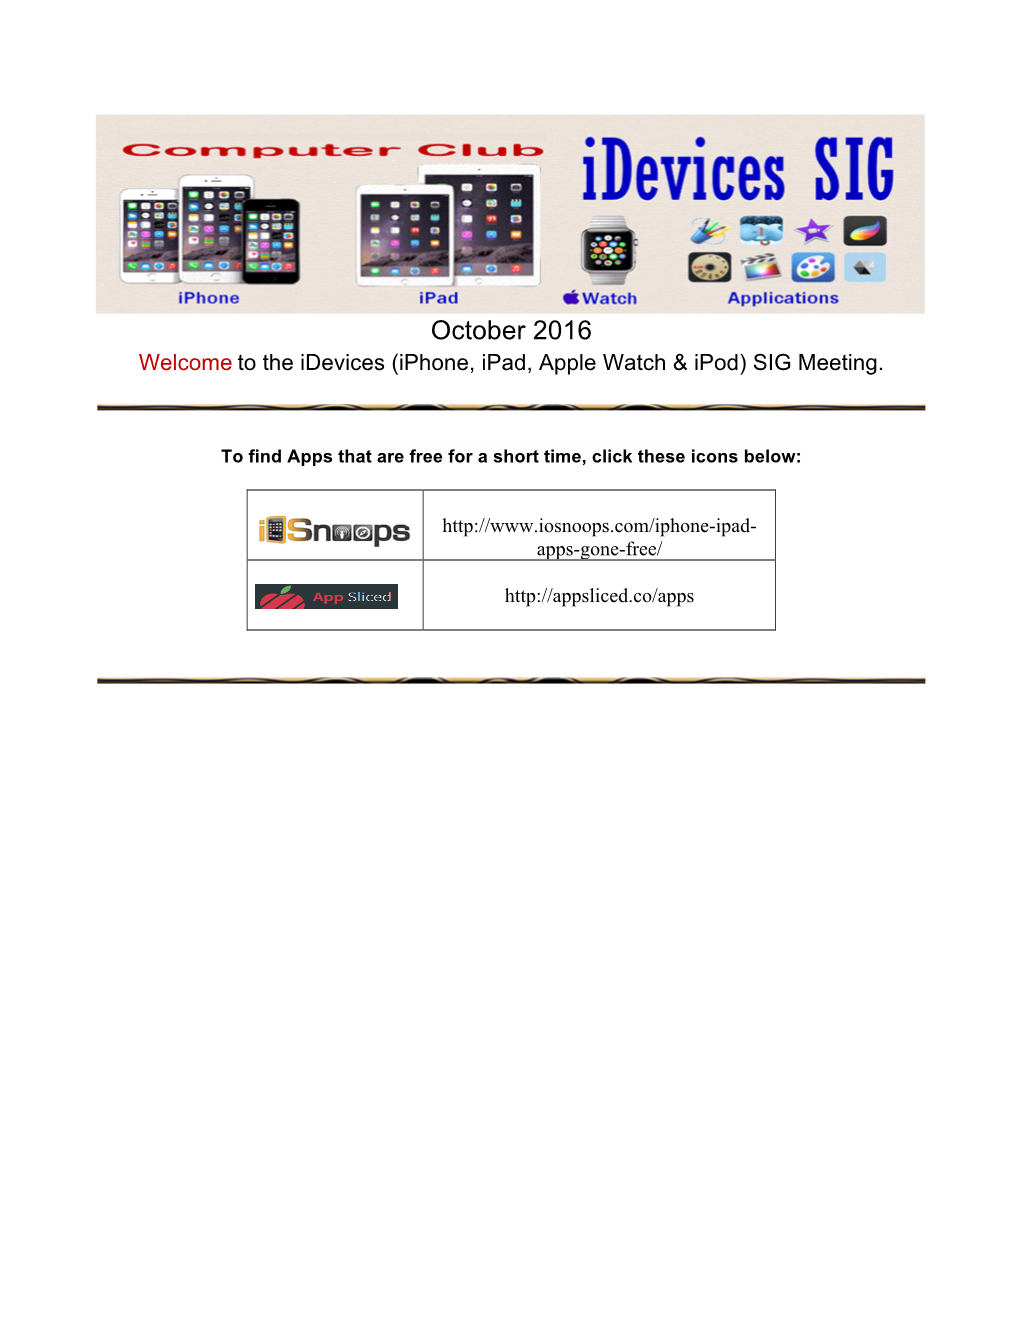 October 2016 Welcome to the Idevices (Iphone, Ipad, Apple Watch & Ipod) SIG Meeting